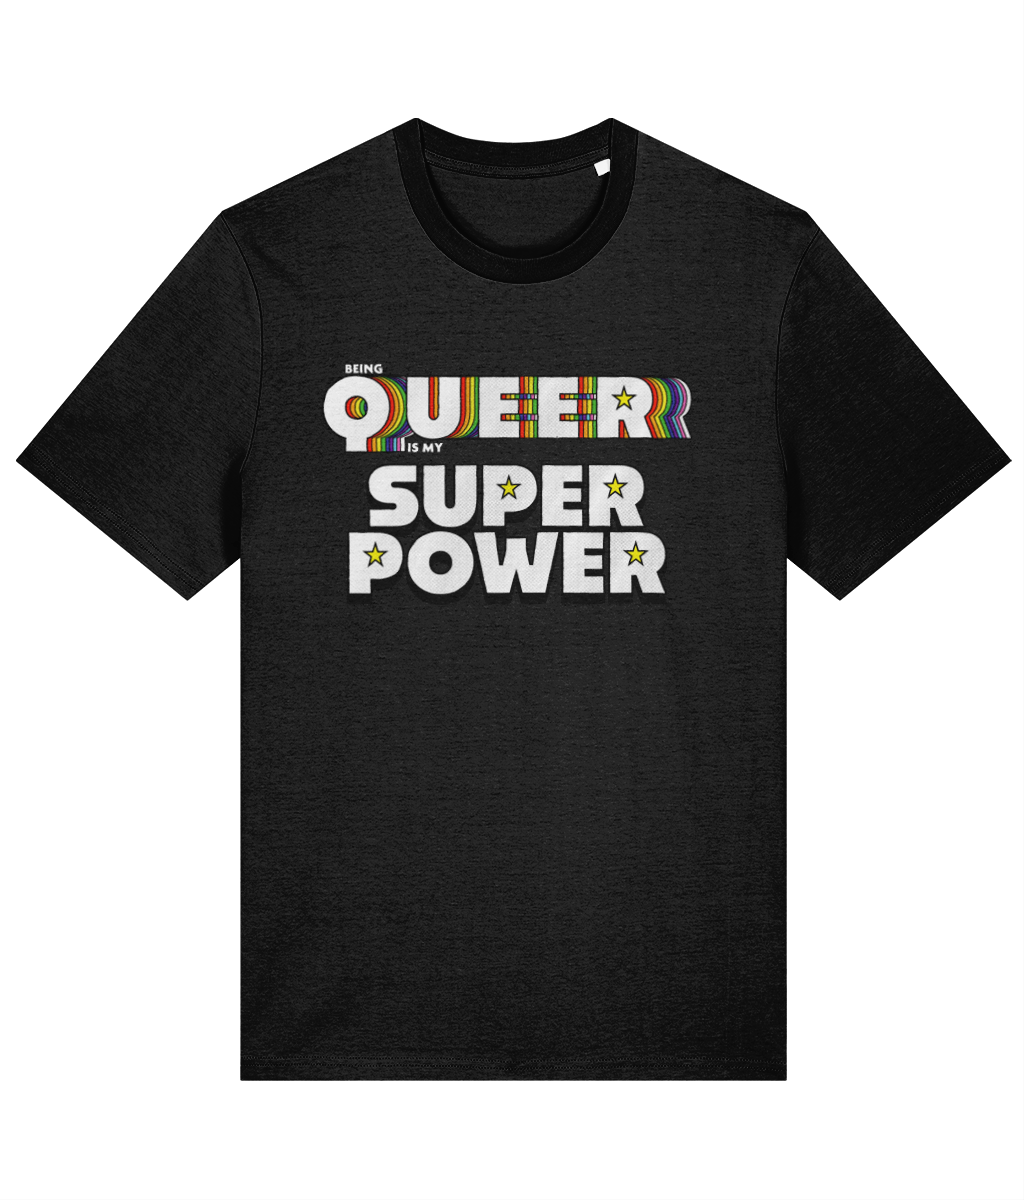 Being Queer is my Superpower T-Shirt